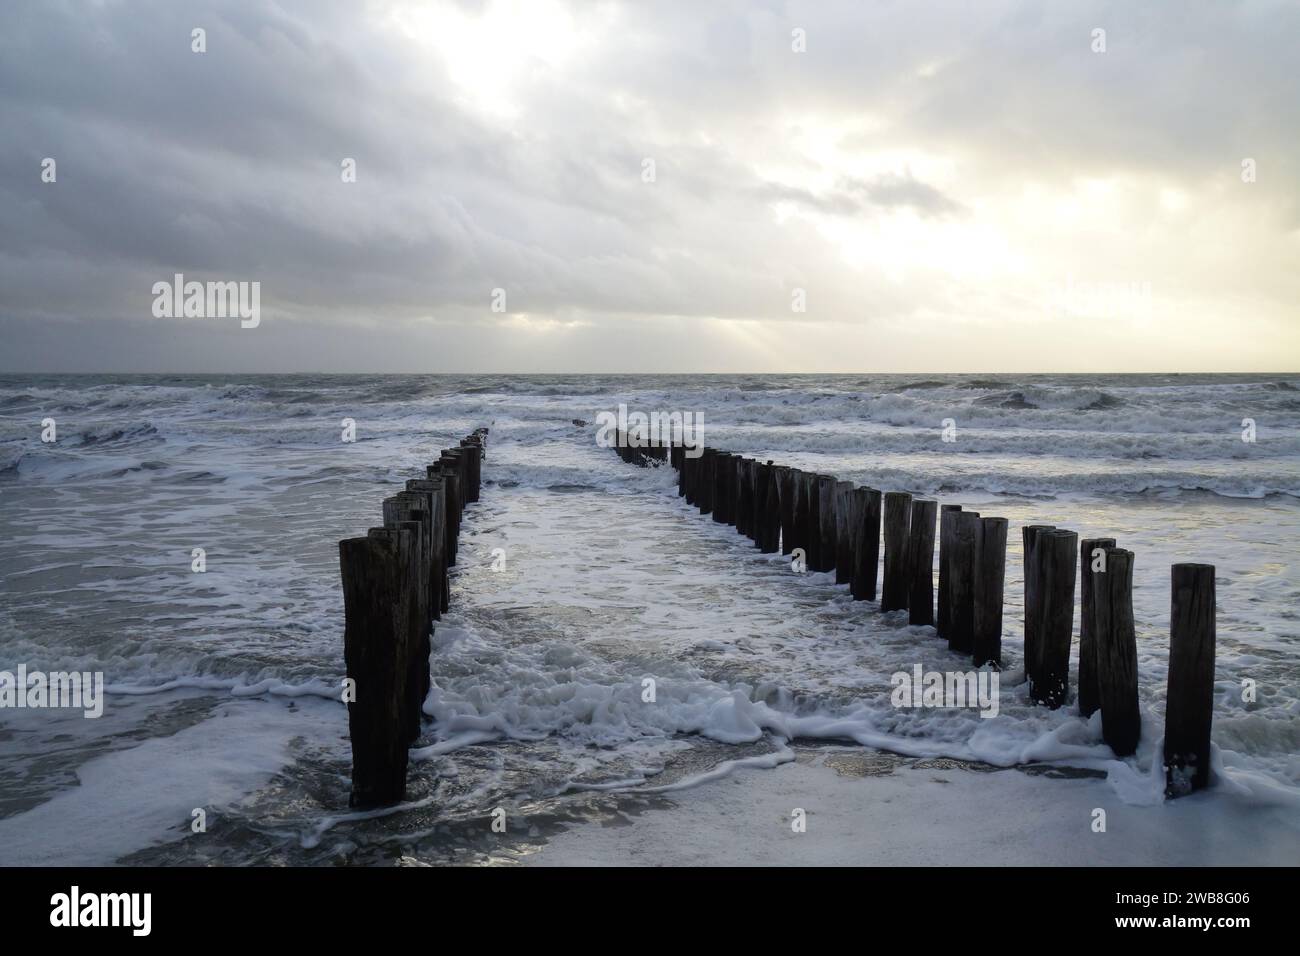 The lines of wooden posts extending out towards the ocean waters Stock Photo